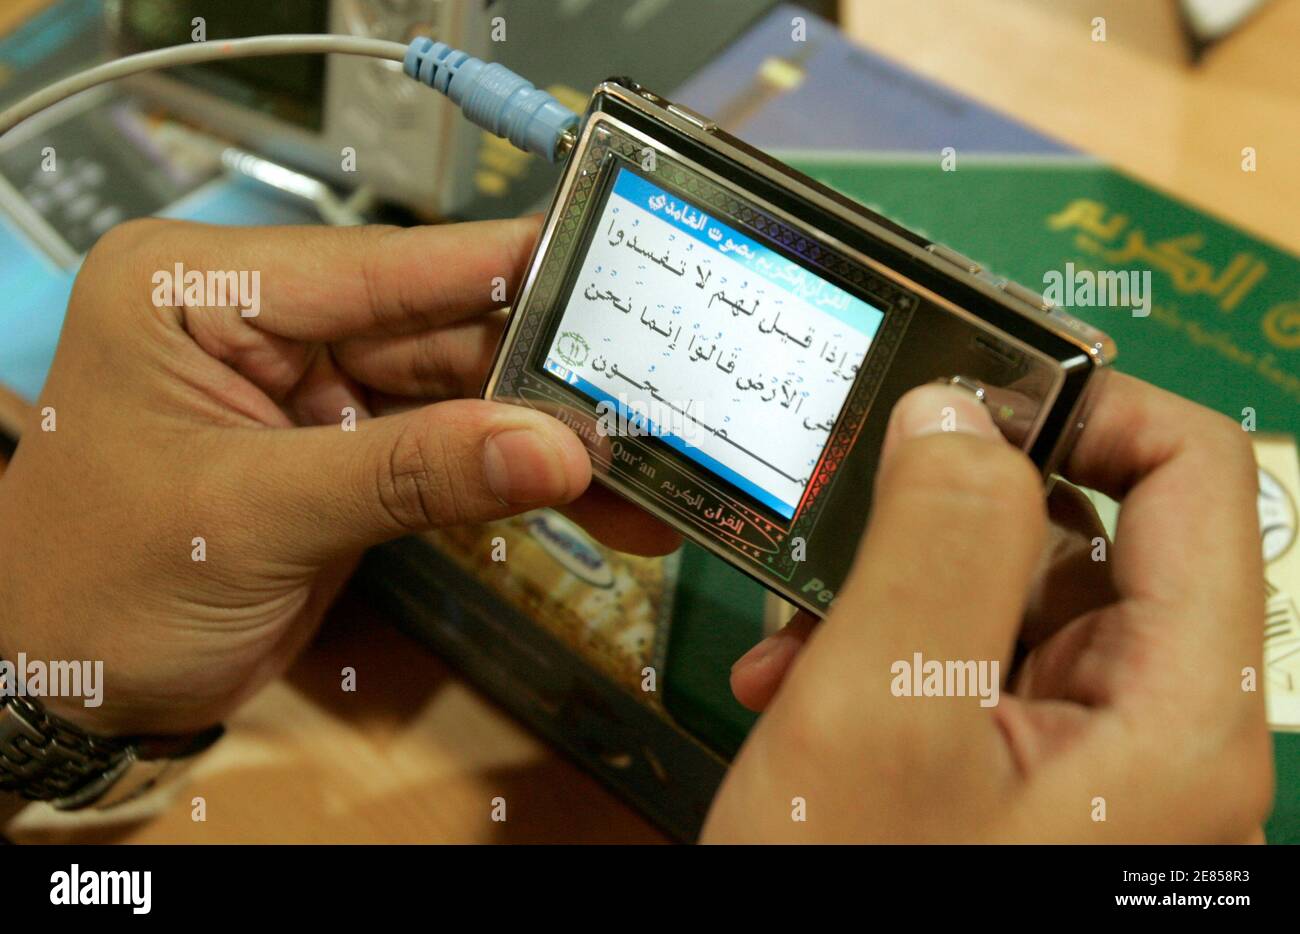 An Indonesian youth reads the Koran from a digital player at a book shop in Jakarta, September 20, 2007. Digital Koran is increasingly popular in Indonesia, the world's most populous Muslim country, where such gadgets sell especially well during the Islamic fasting month of Ramadan when religious fervour is high and reading the scripture is an essential part of the observance. Picture taken September 20, 2007.   REUTERS/Crack Palinggi (INDONESIA) Stock Photo